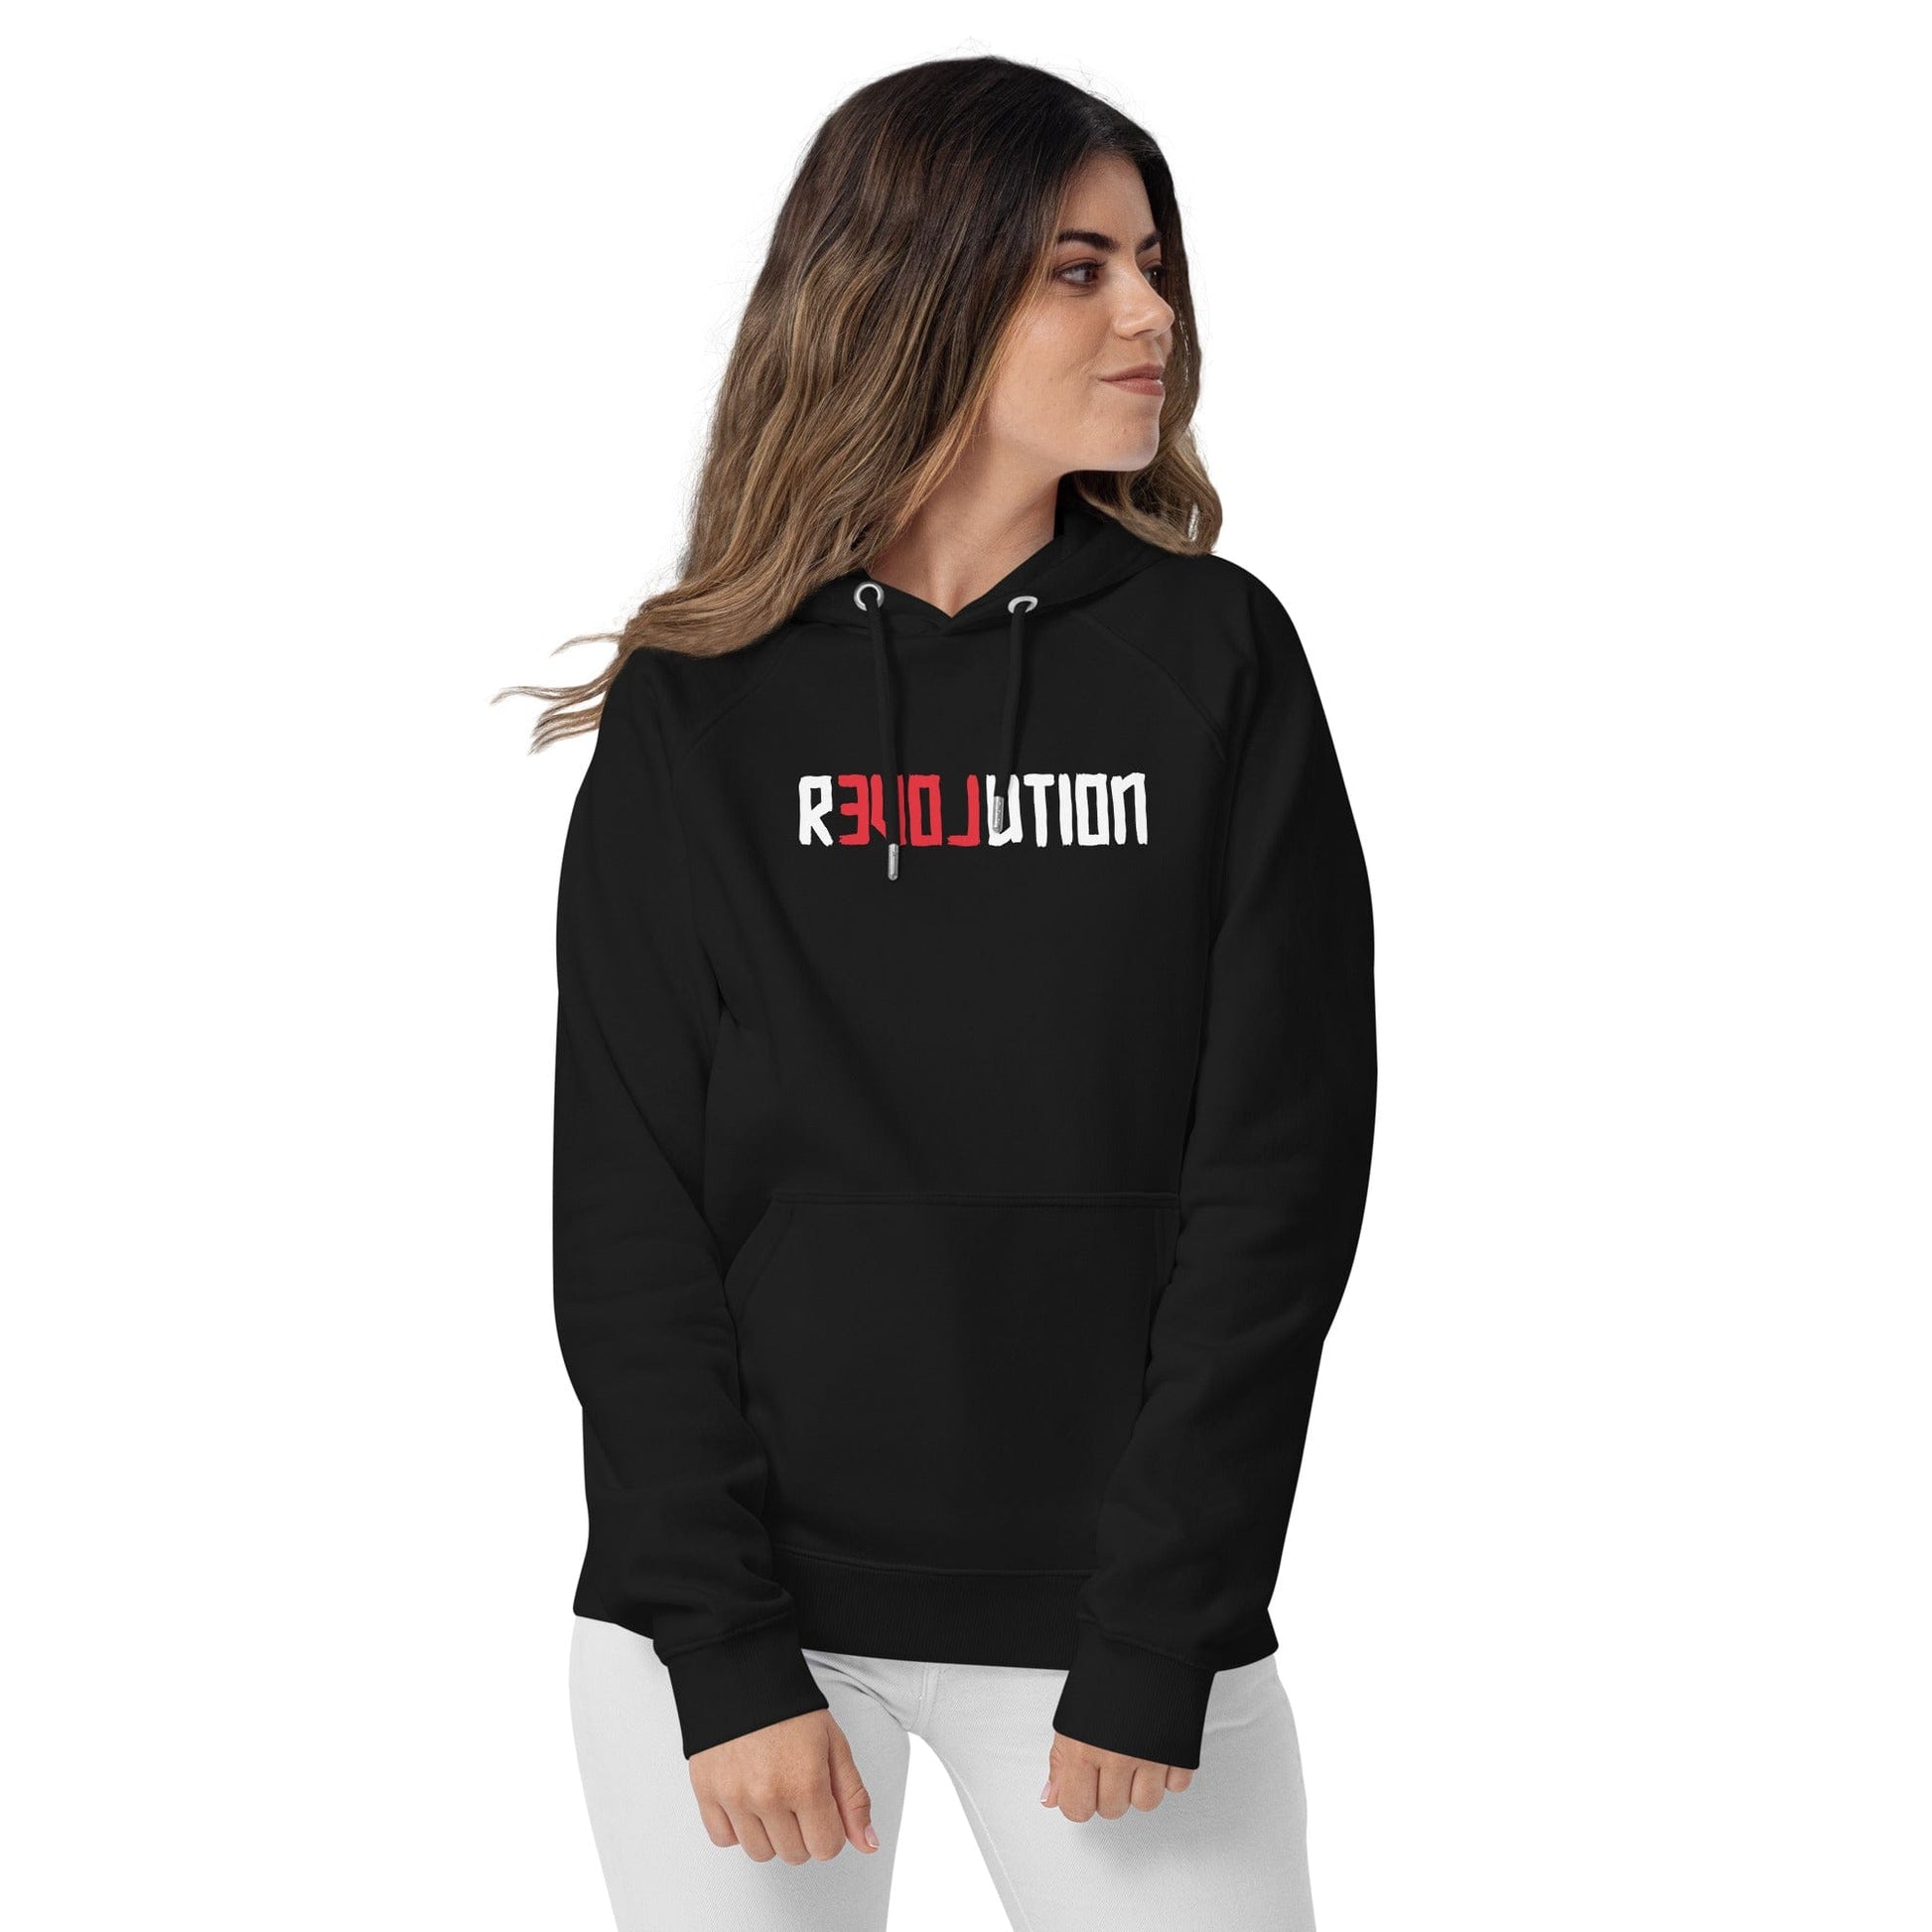 There is Love in Revolution - Eco Hoodie